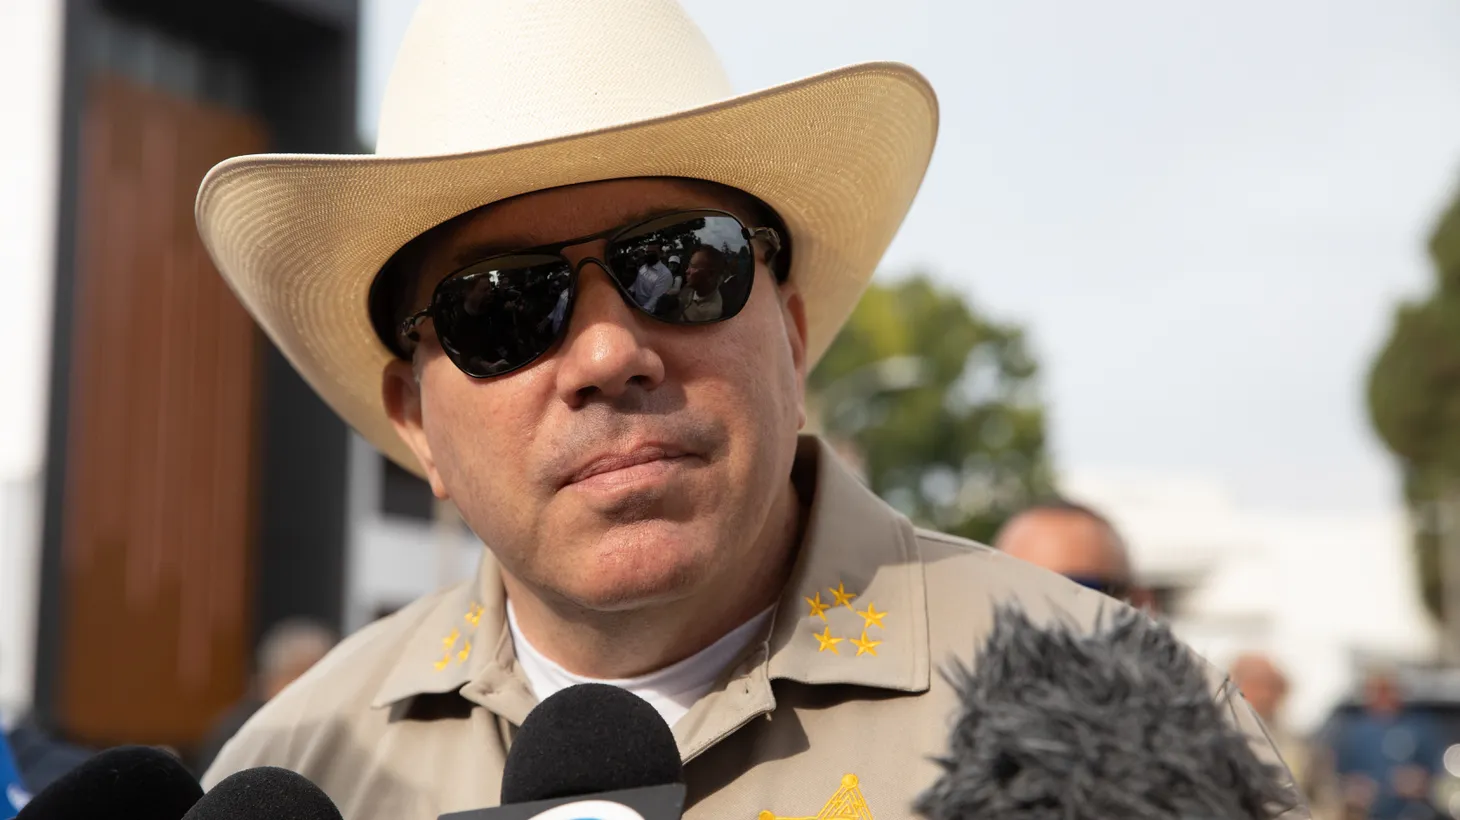 LA County Sheriff Alex Villanueva promised to bring an end to Veterans Row.